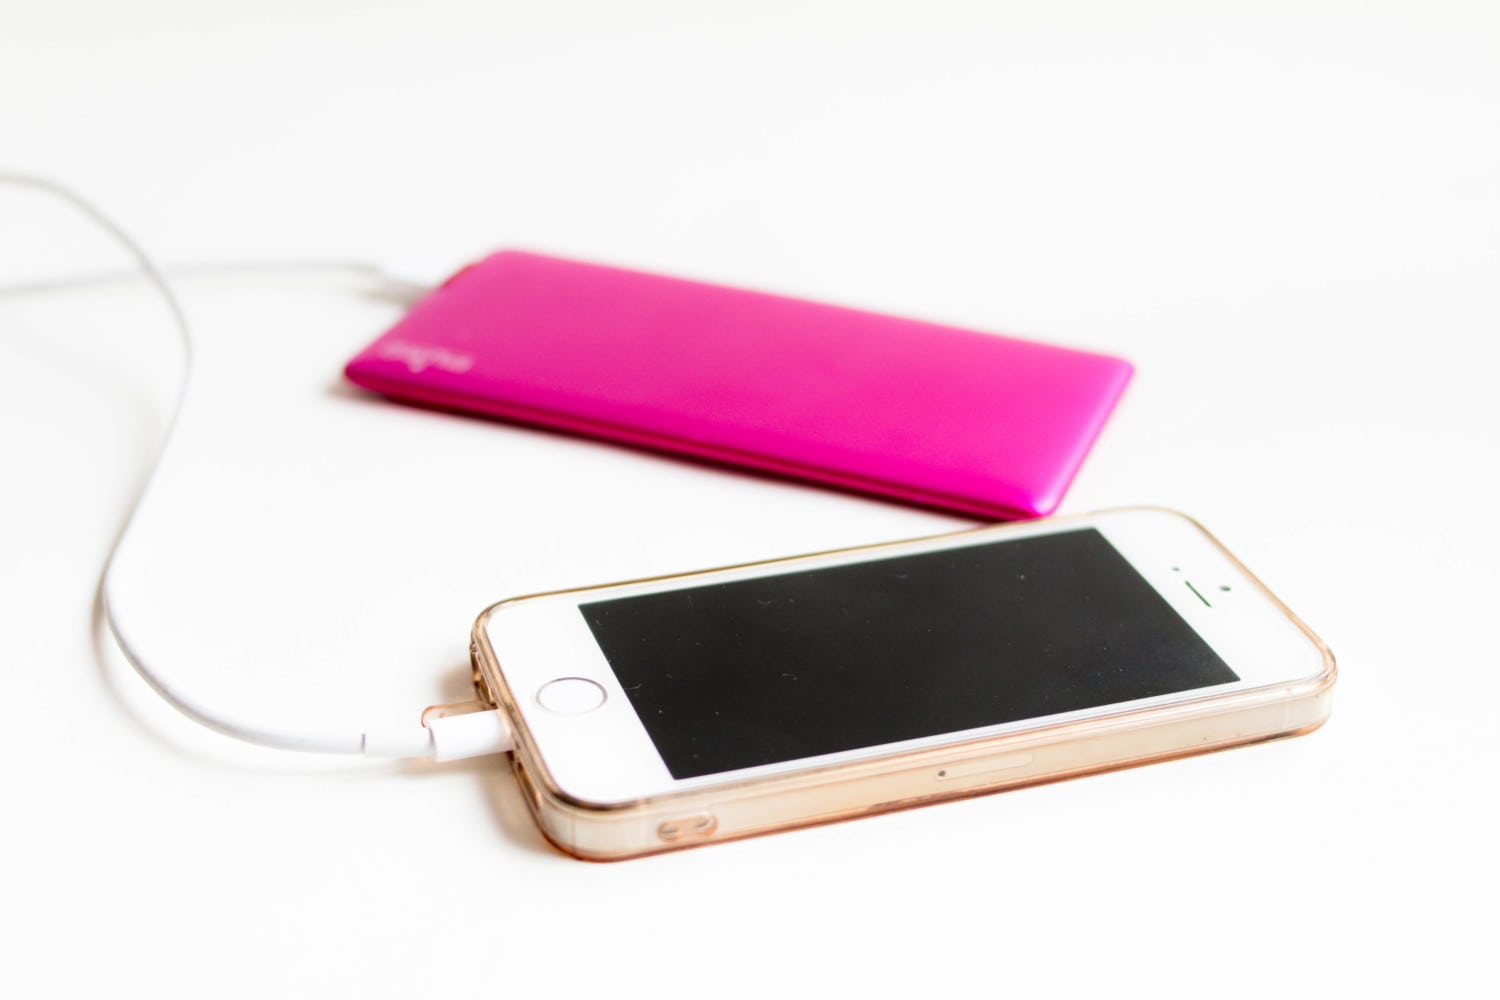 iPhone 5c with pink charger